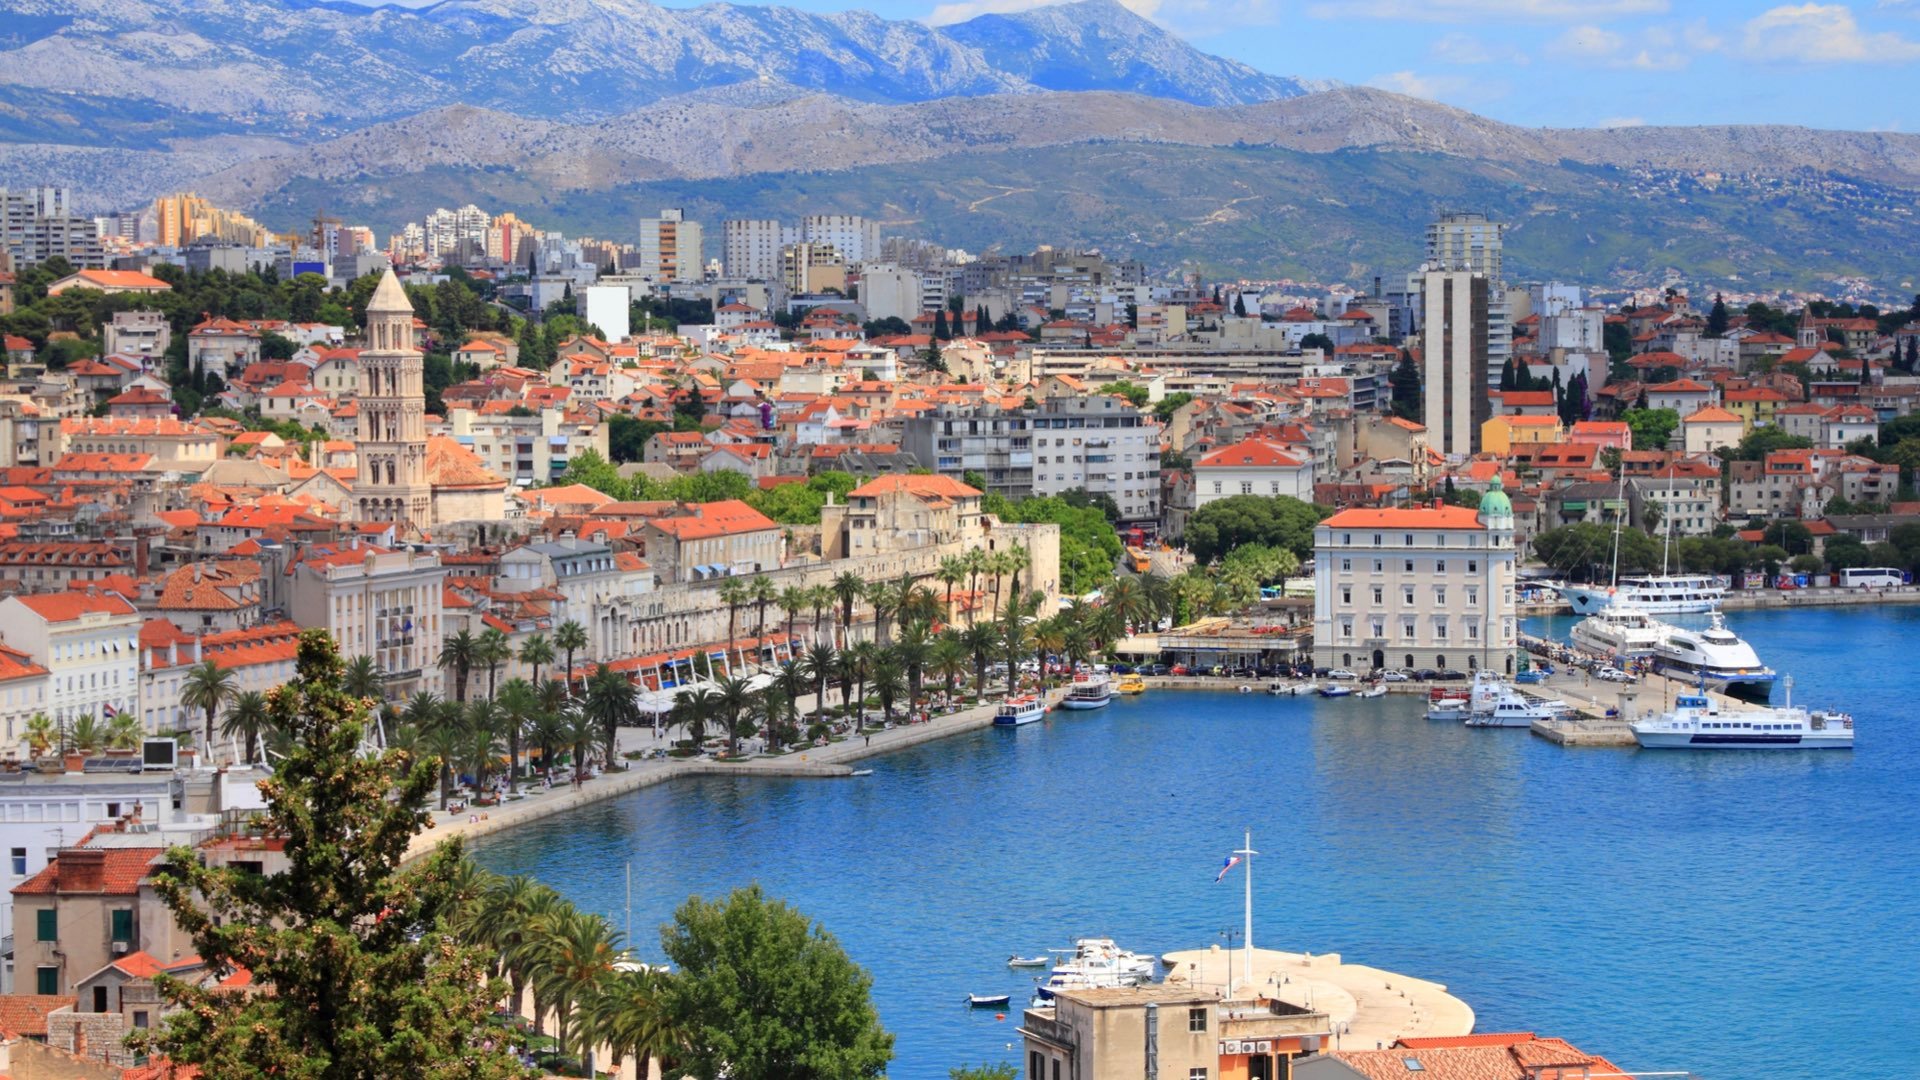 <p><span>Croatia has it all, from Zagreb’s modern, urban nightlife to the history-steeped city of Dubrovnik. While prices have steadily increased, Croatia remains an affordable destination compared to Western Europe. A 15-day public transit pass for </span><a href="https://www.zet.hr/tickets-and-fares/fares/605"><span>less than $30</span></a><span> can give you free rein in the city.</span></p>